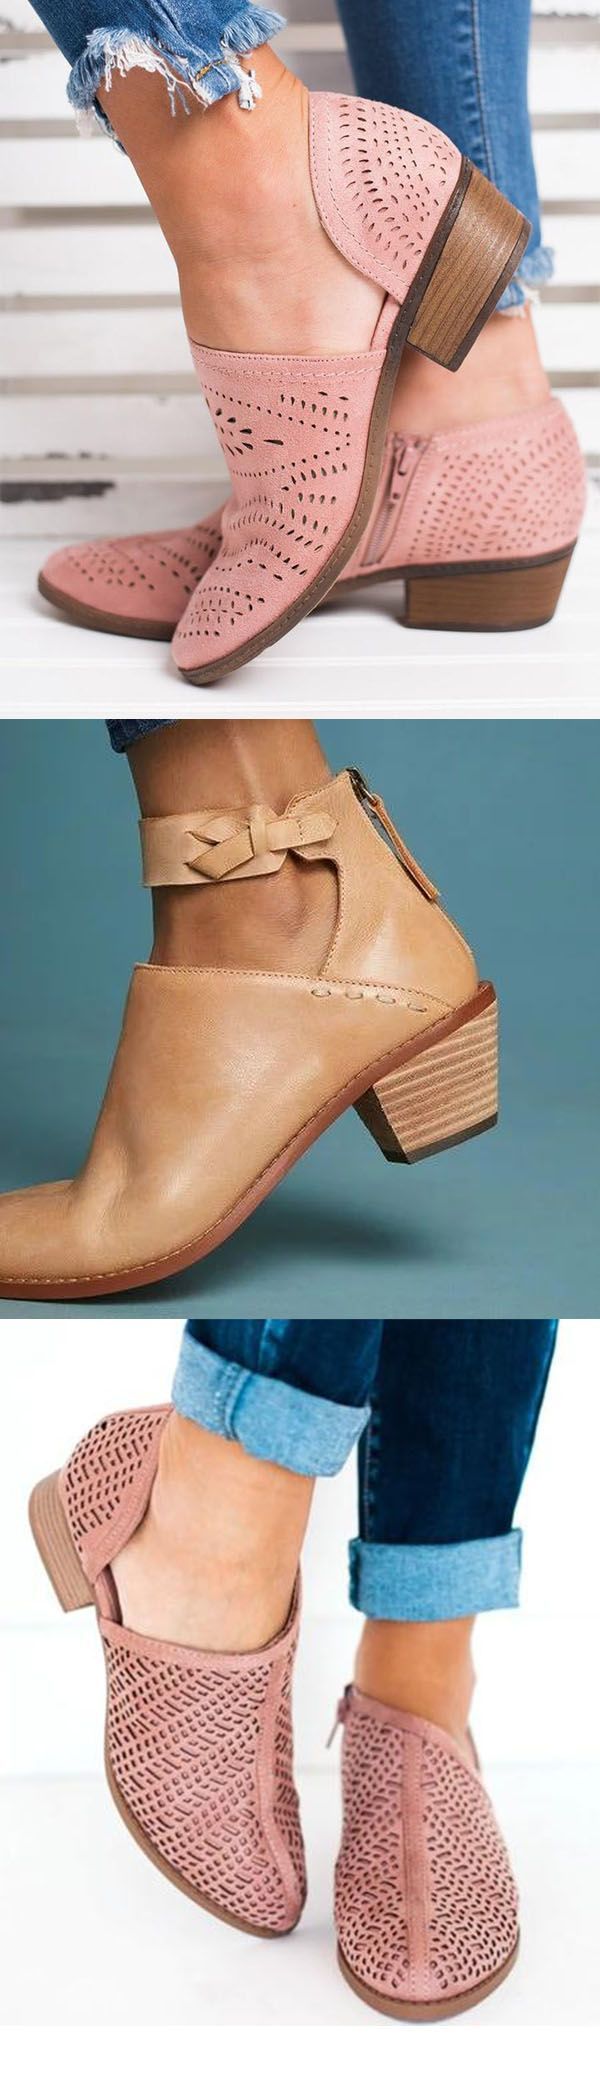 Hot Sale!Hollow-out Low Heel Cutout Booties Faux Suede Zipper Ankle Boots -   21 olivia palermo flats
 ideas